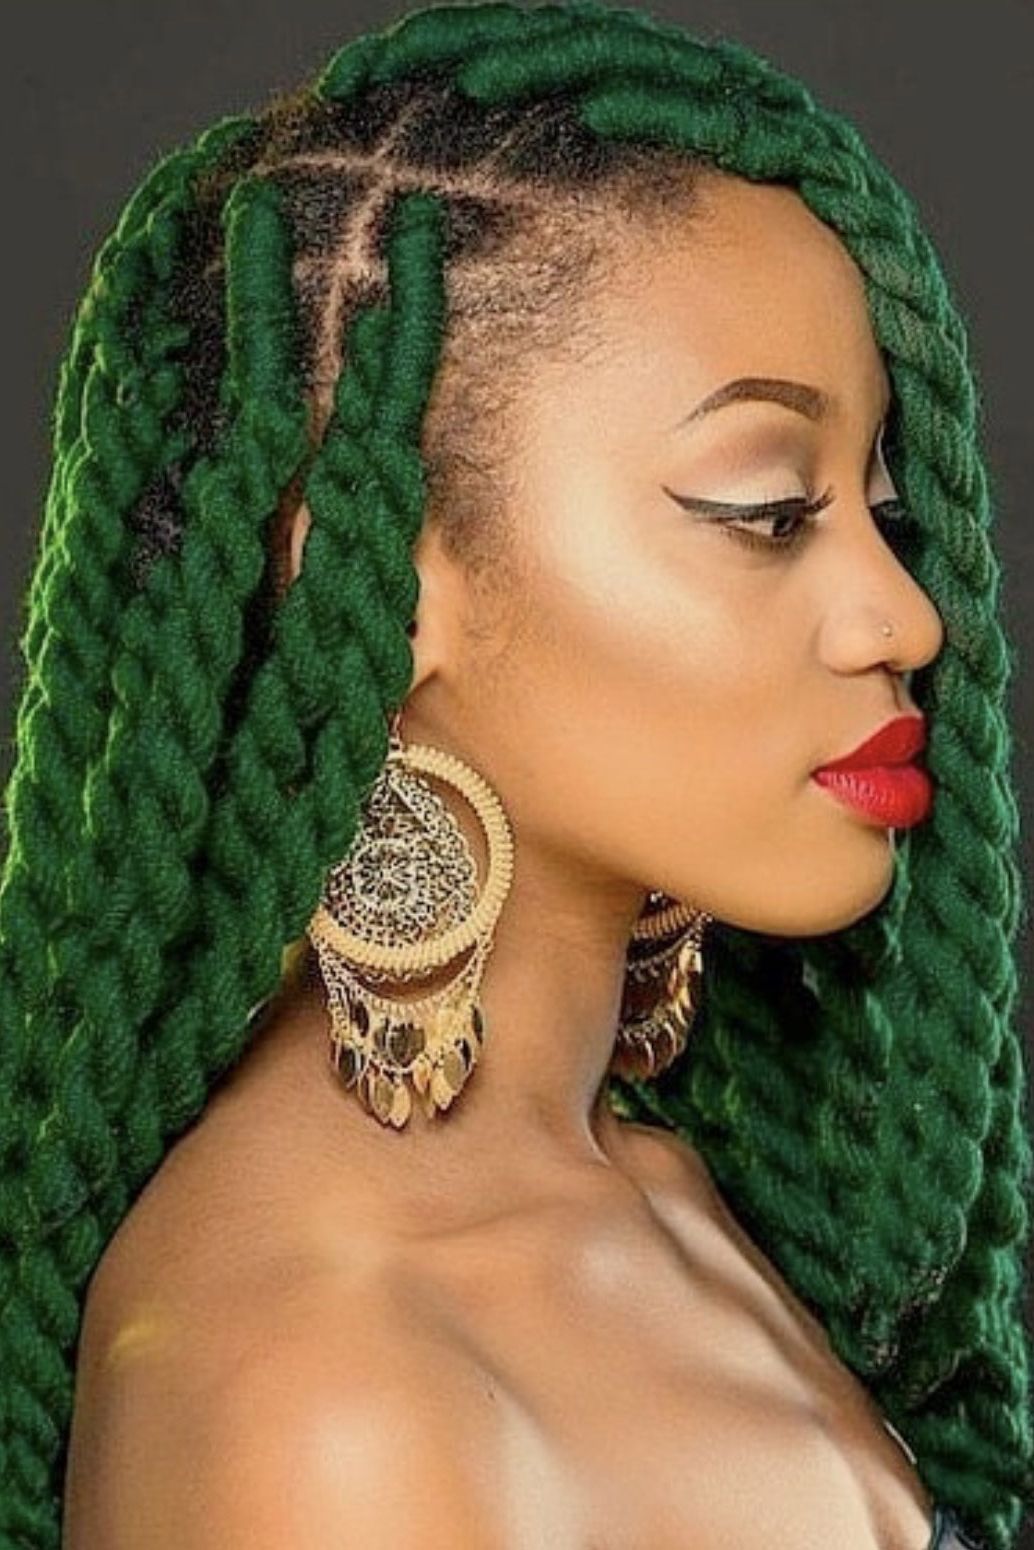 2019 Yarn Braid Hairstyles Over Dreadlocks Intended For Protective Styles 101: Beautiful Yarn Twists And Locs To (View 17 of 20)